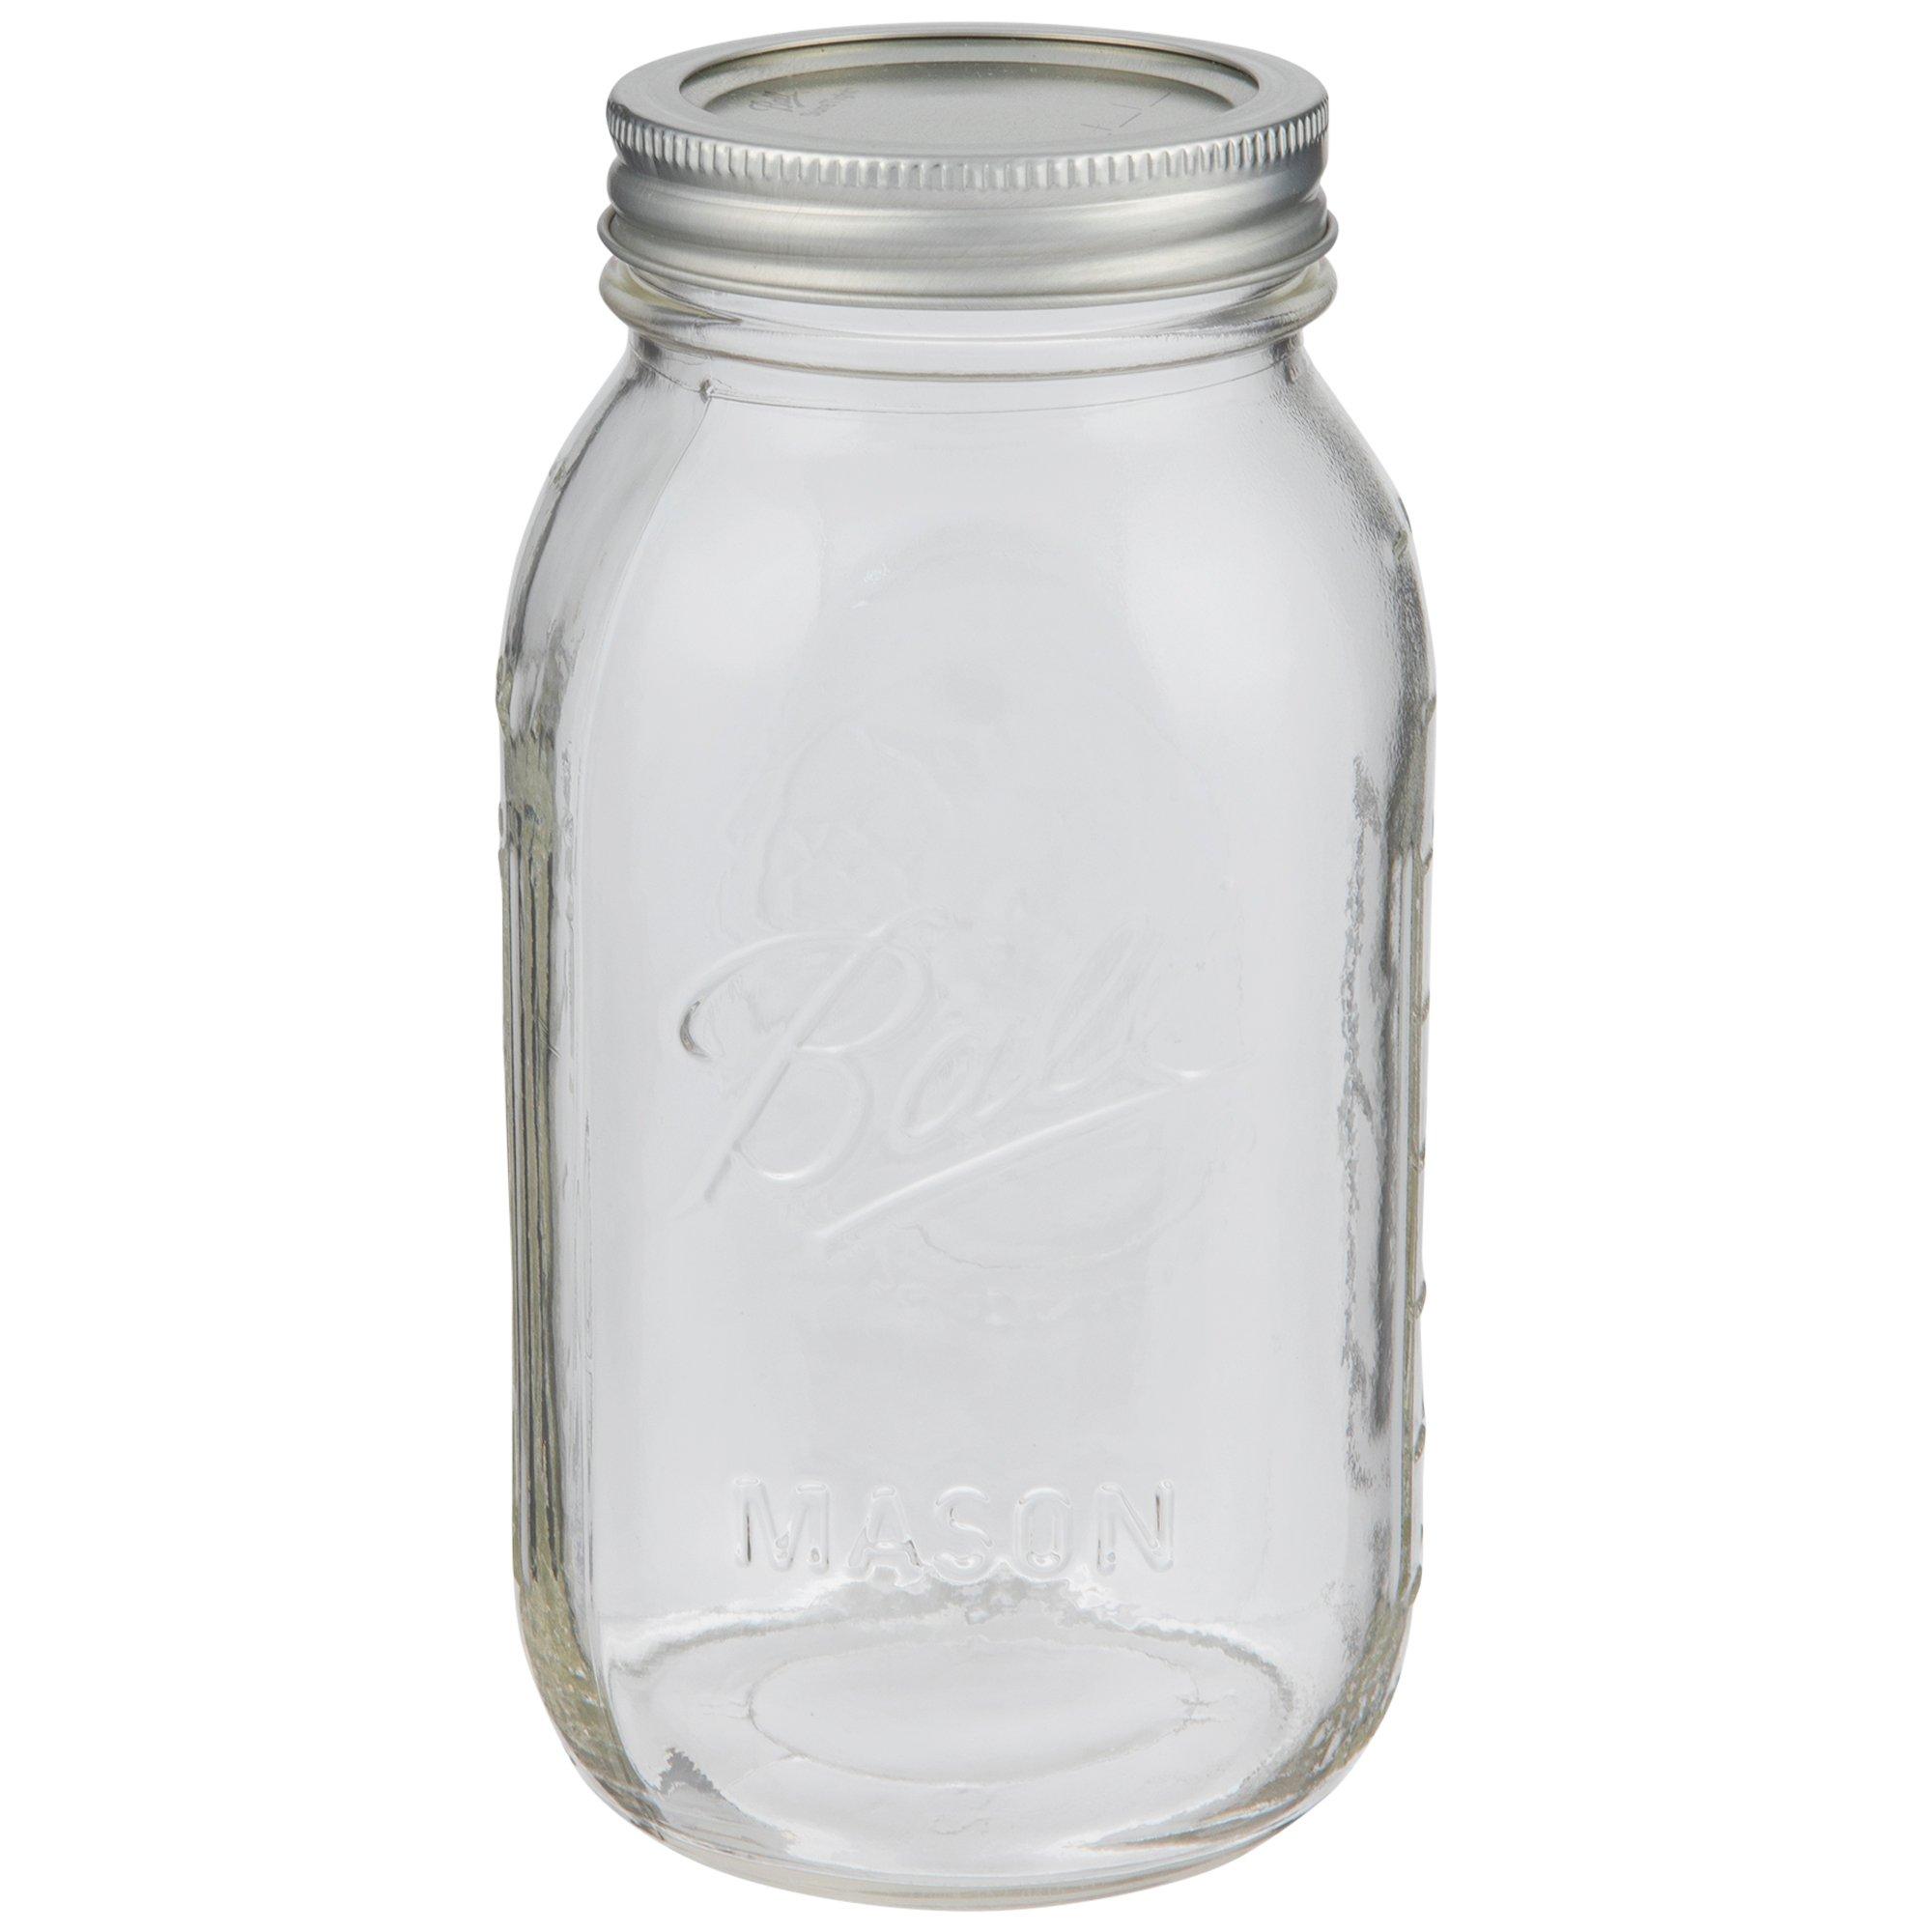 Wide Mouth Mason Jars 24 oz - (2 Pack) - Ball Wide Mouth 24-Ounces Pint and  a Half Mason Jars With Airtight lids and Bands - Clear Glass Mason Jars